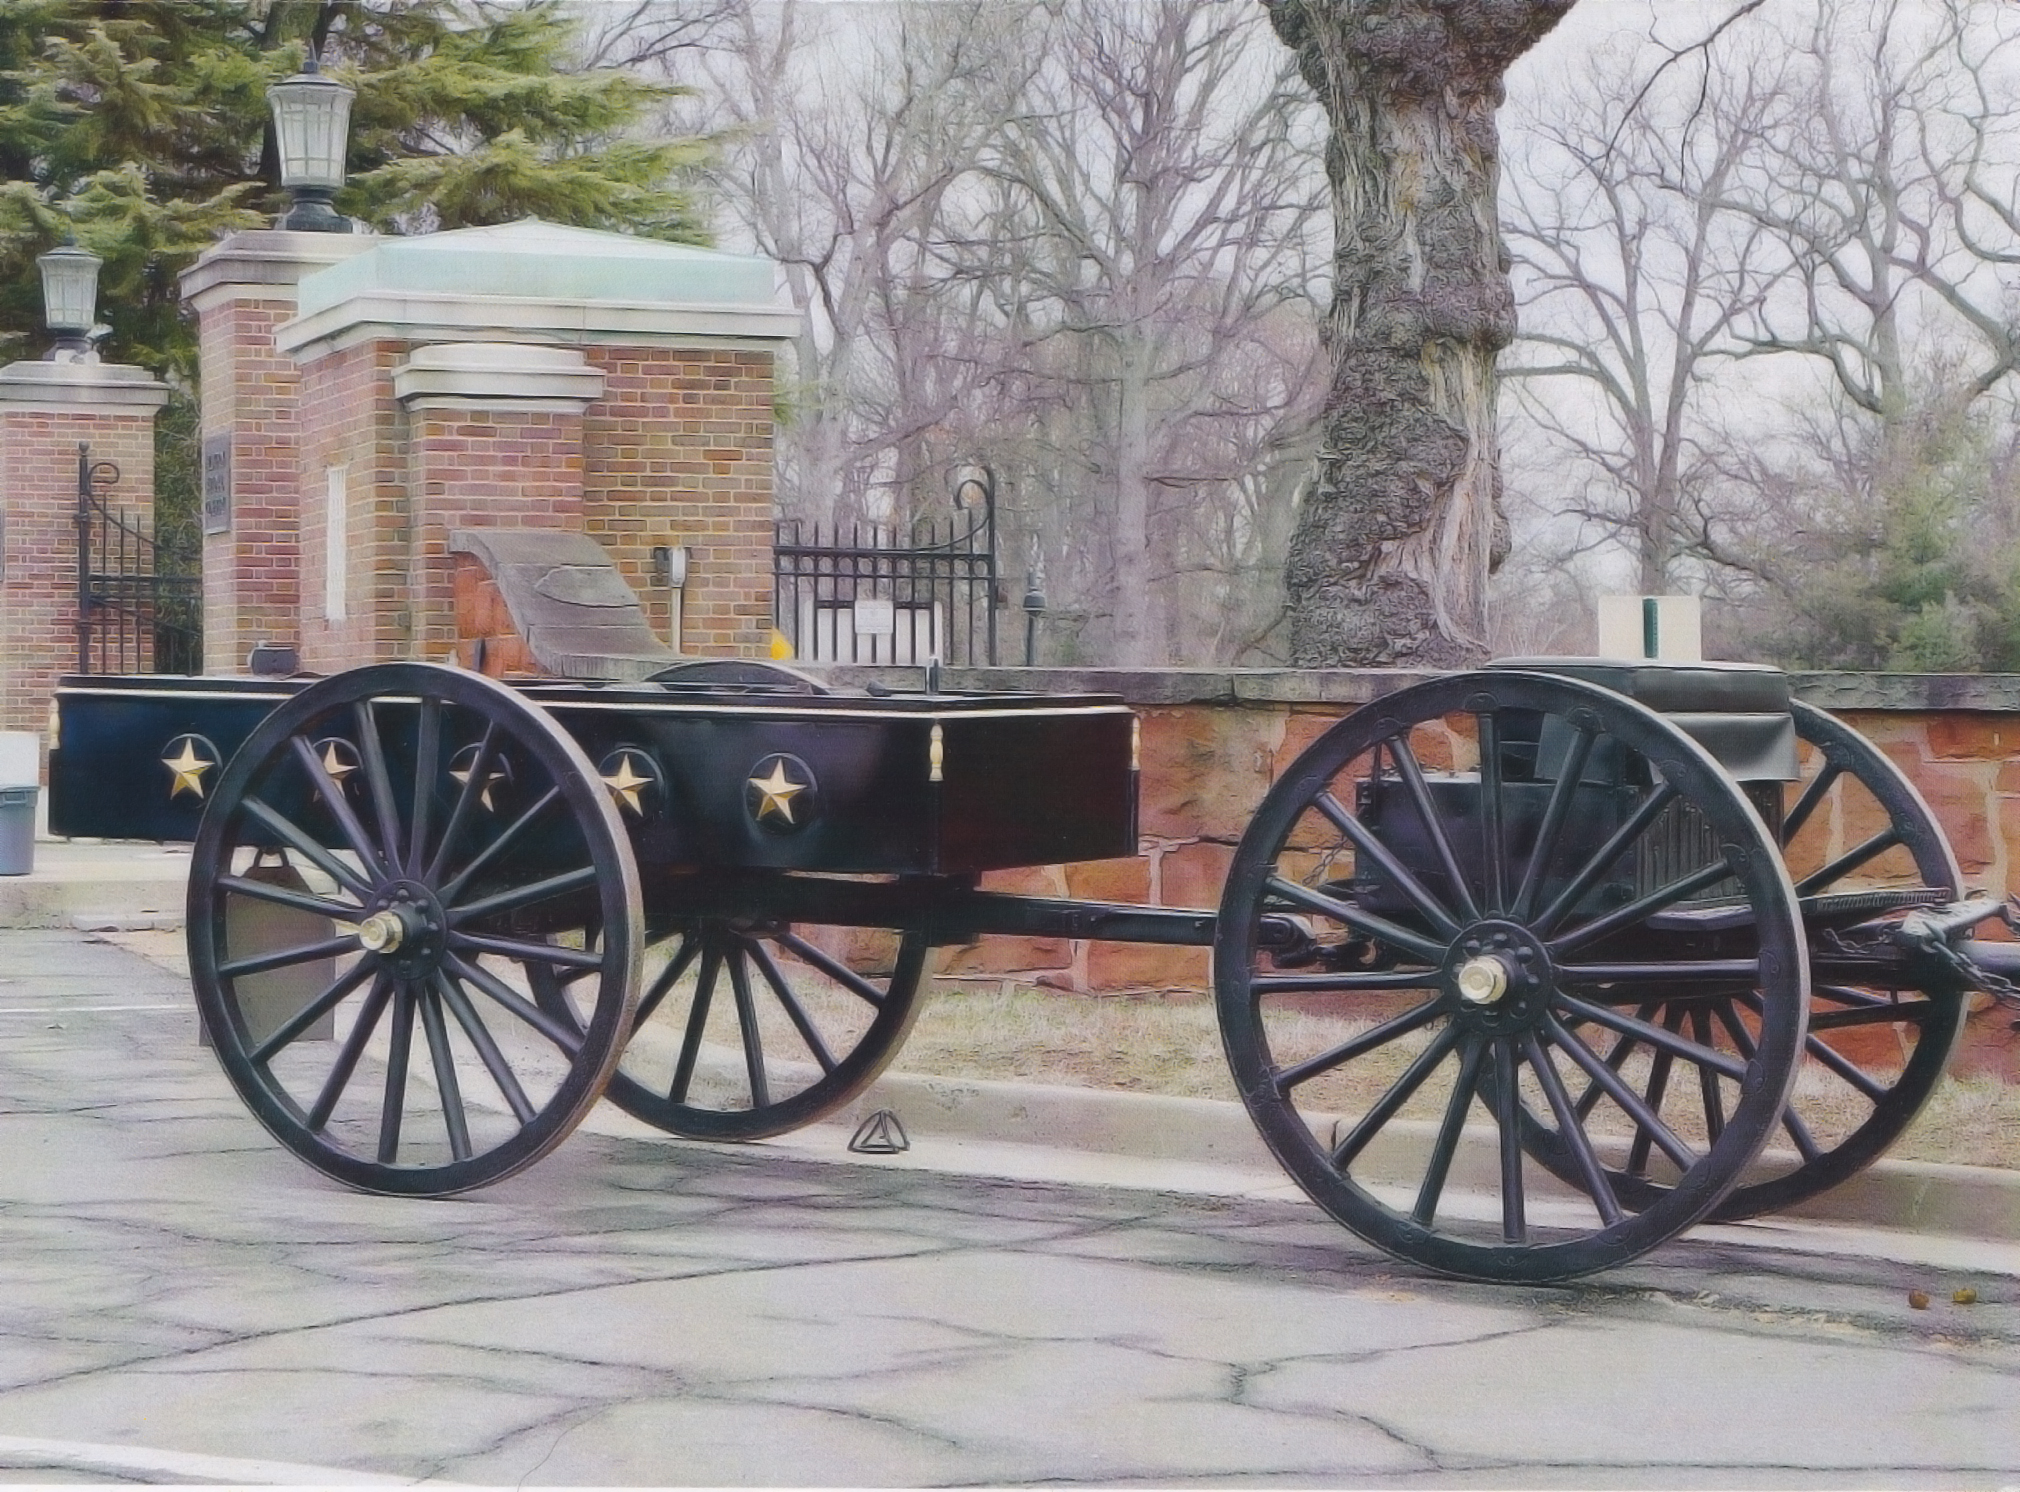 1948 Caisson Stable renovated & restored for the Arlington National Cemetery in 2011